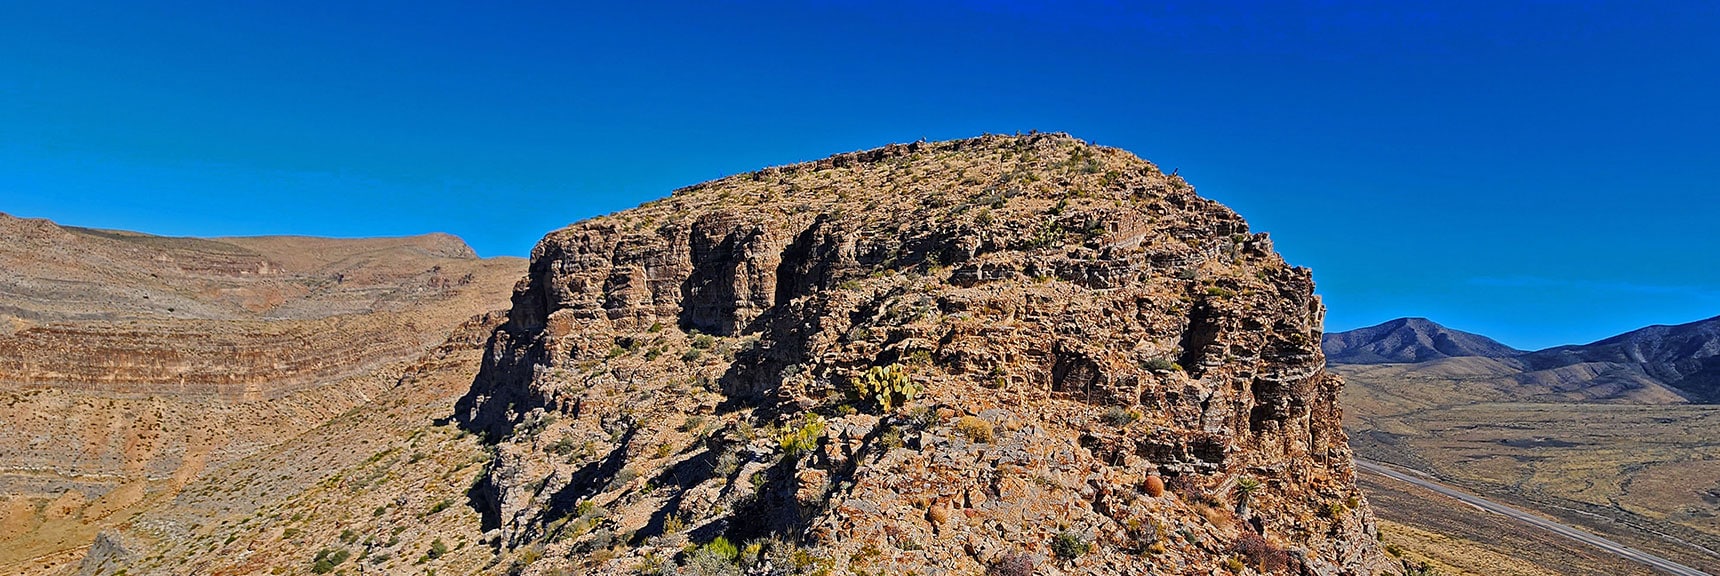 Next Stretch of Ridgeline Guarded by Cliffs. Potential Passage Along Left Cliff Base. | Landmark Bluff | Lovell Canyon, Nevada